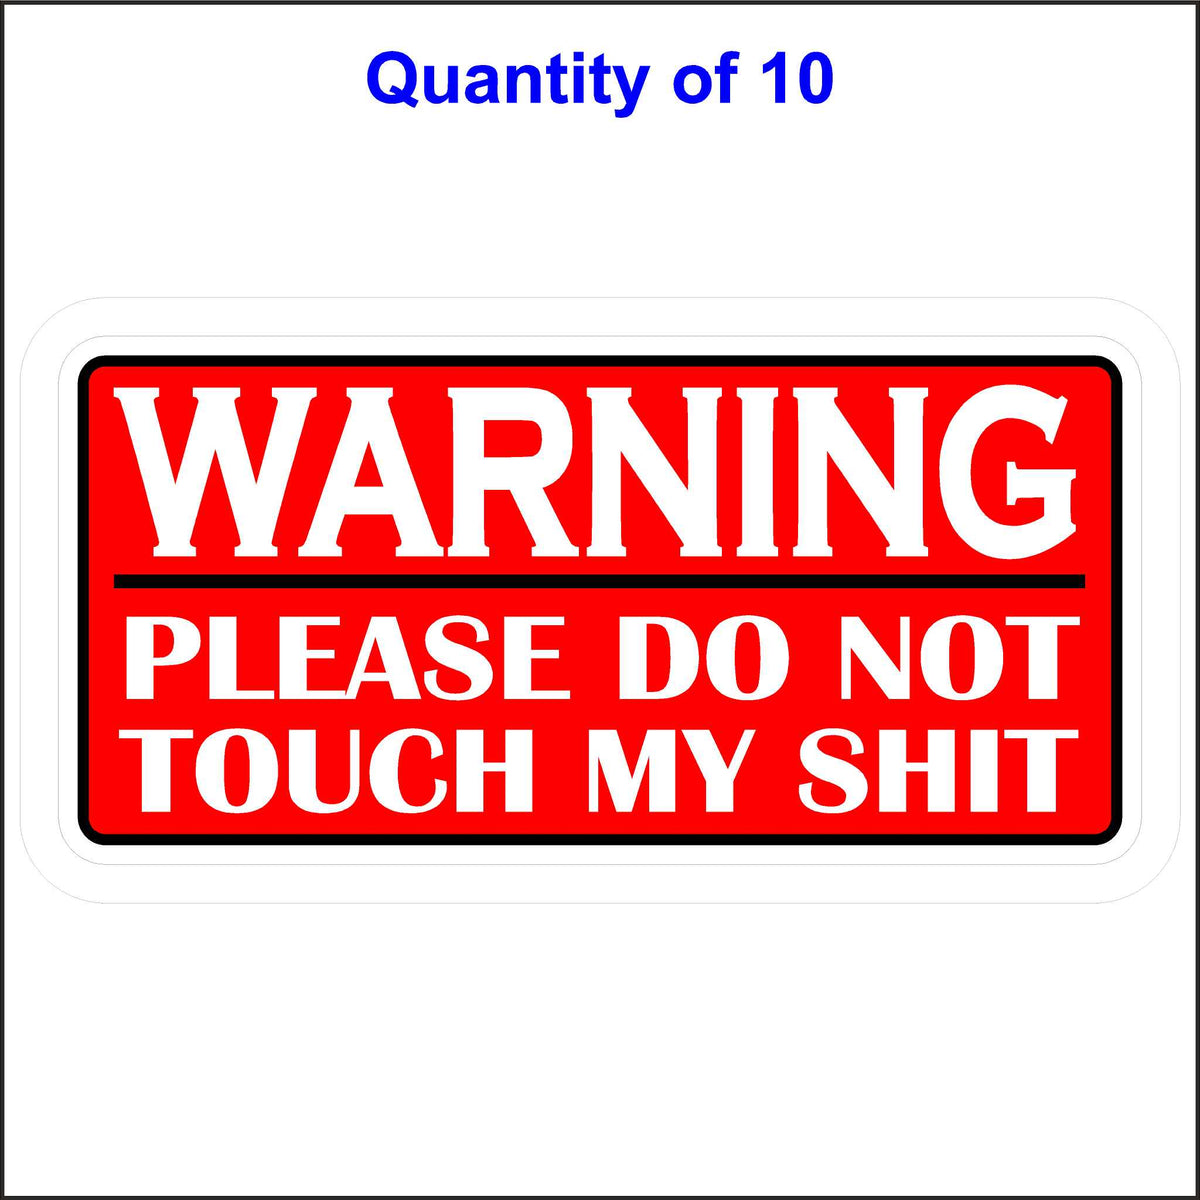 Warning Please Do Not Touch My Shit Sticker With a Red Background and White Lettering. 10 Quantity.